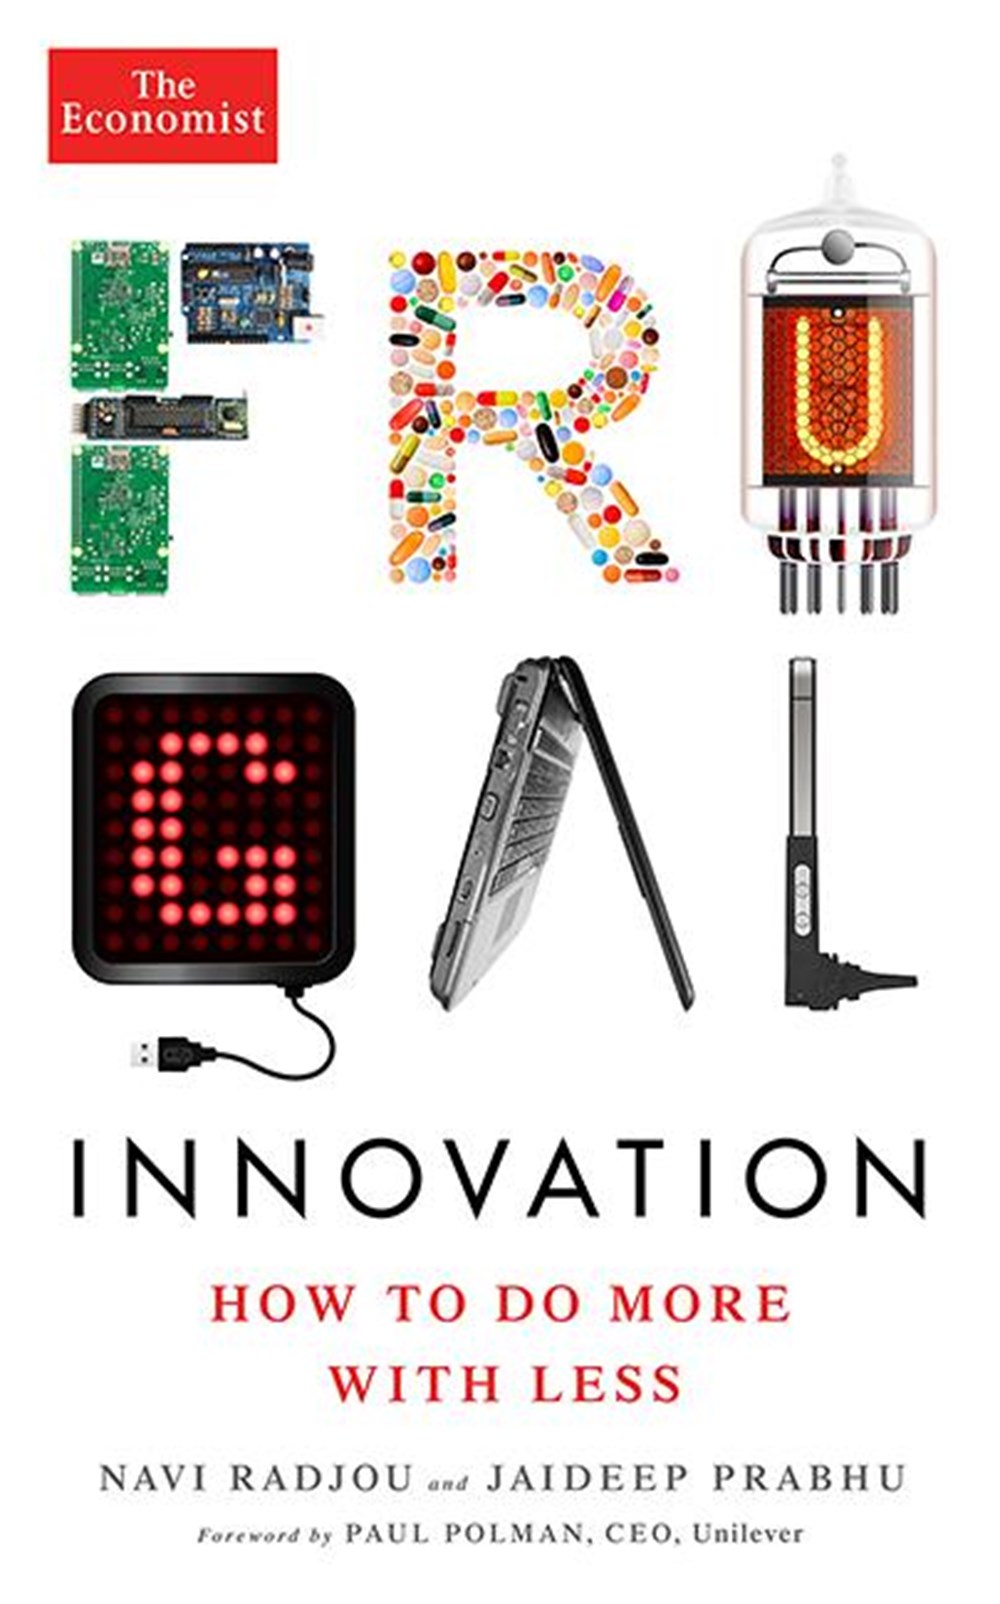 Frugal Innovation How to Do More with Less